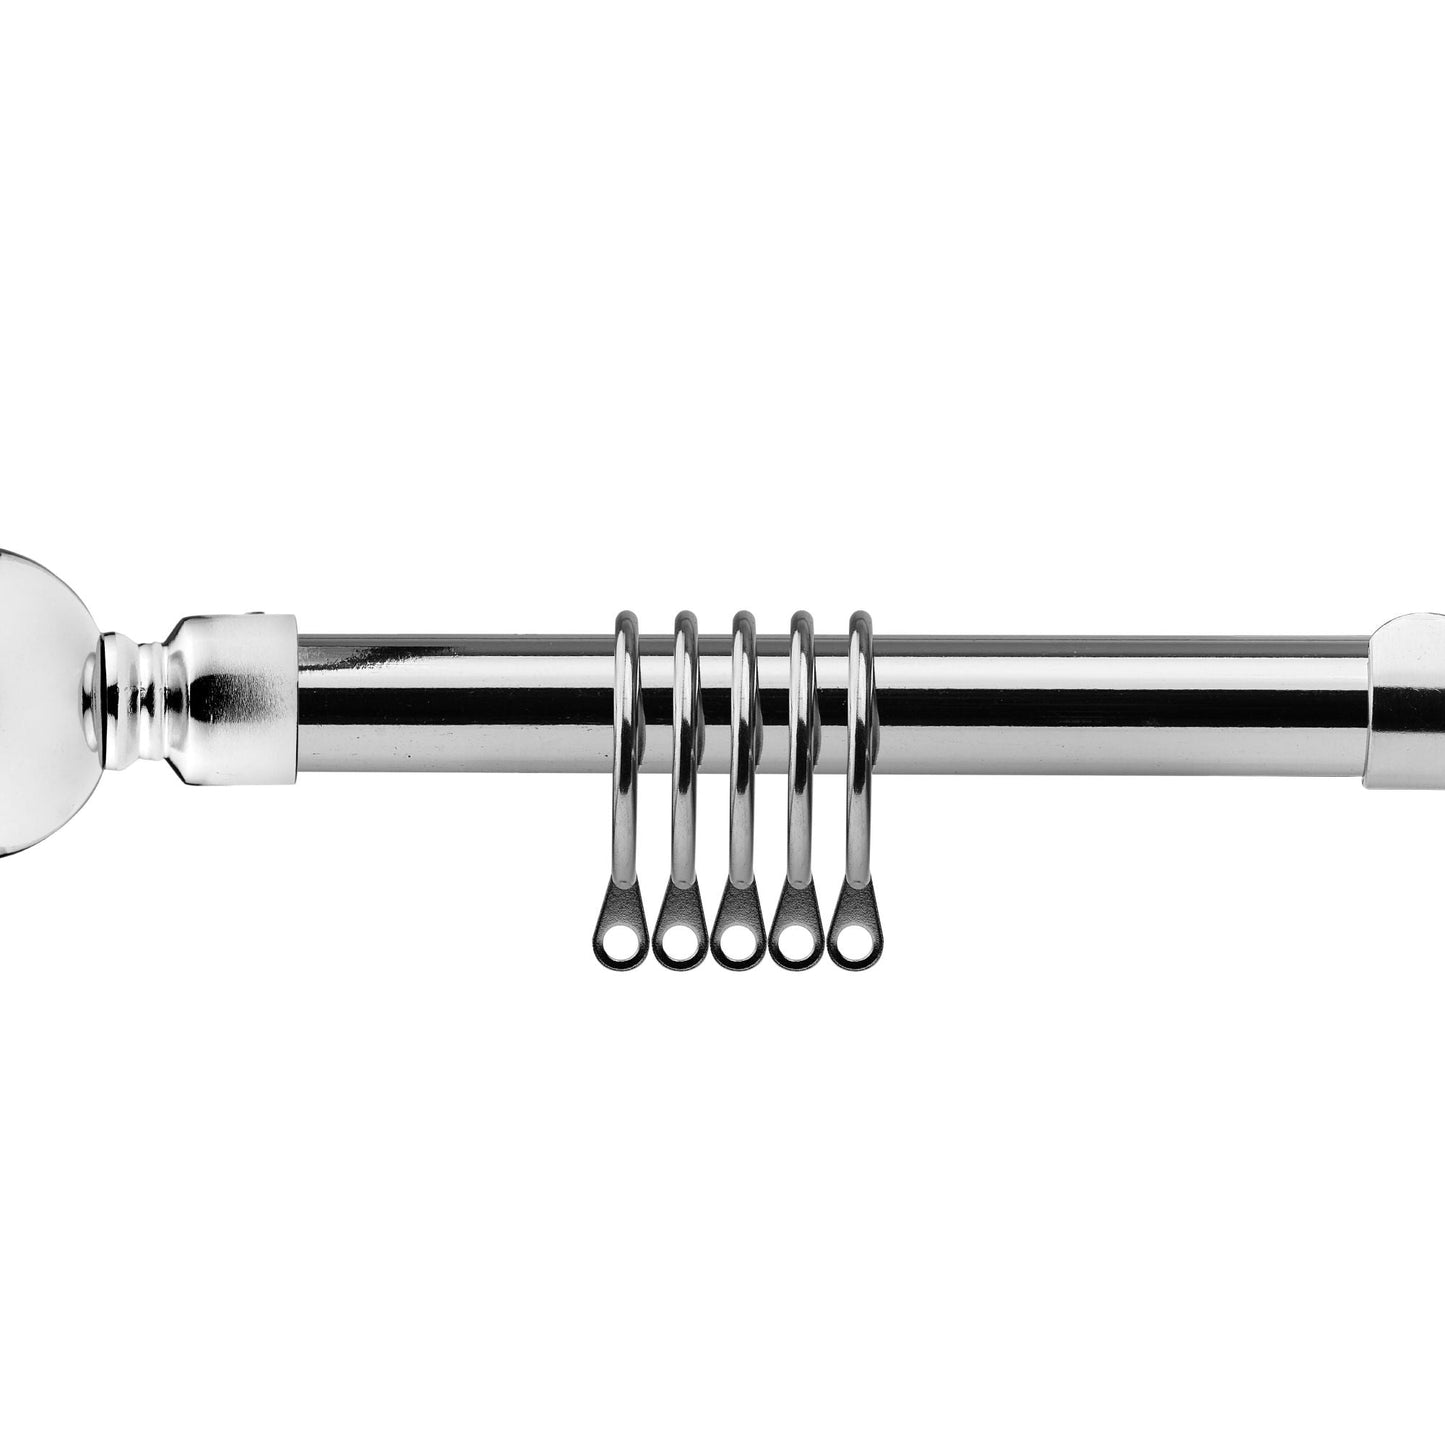 Chrome Bling Diamond Extendable Curtain Pole with Rings